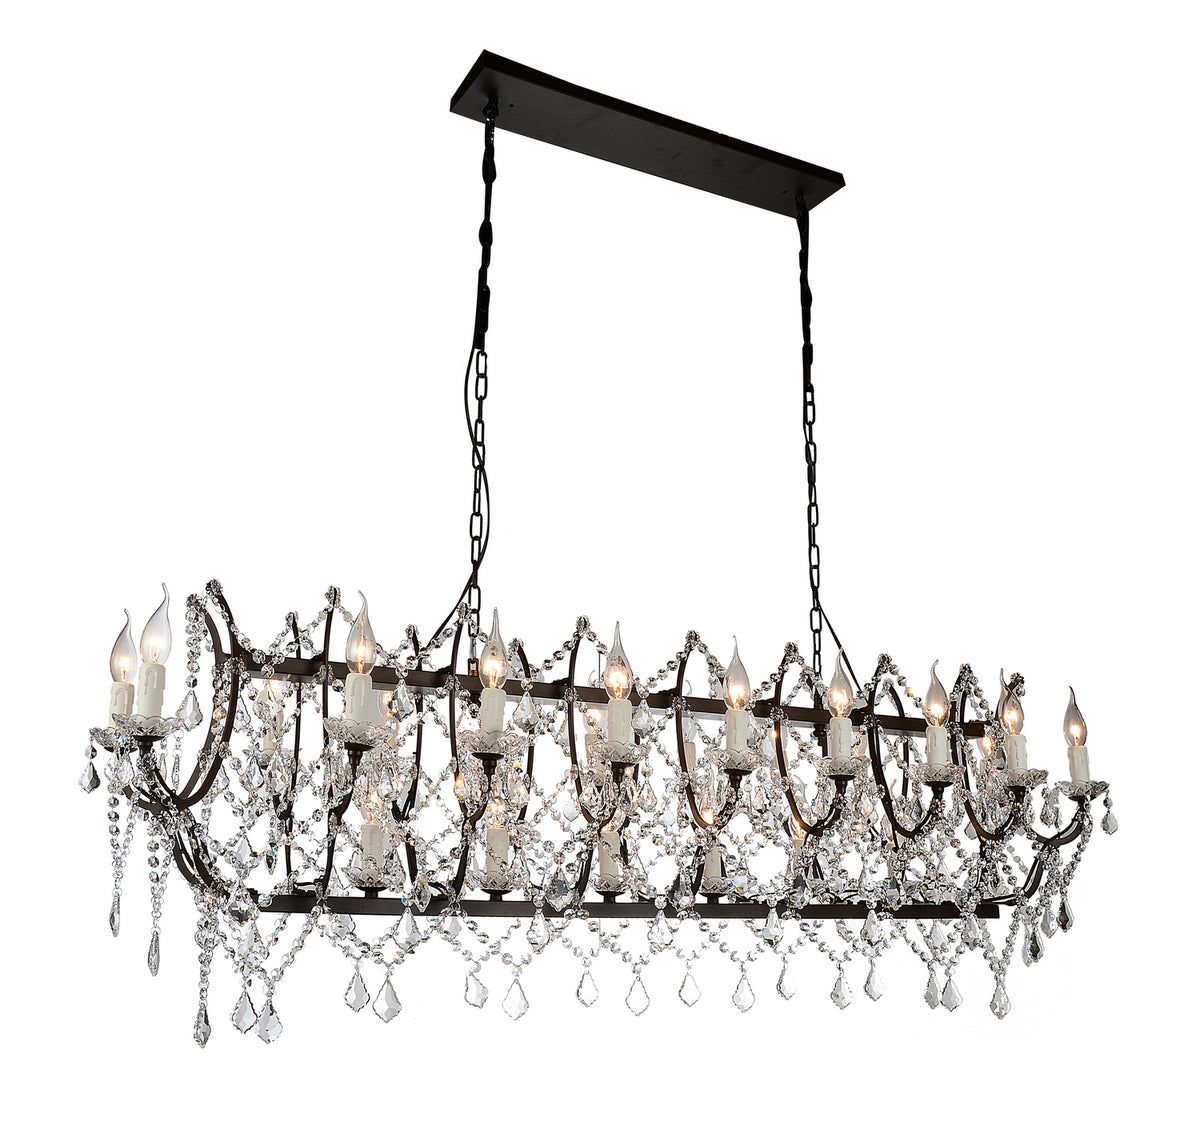 CWI Lighting 24 Light Chandelier from the Phraya collection in Dark Brown finish